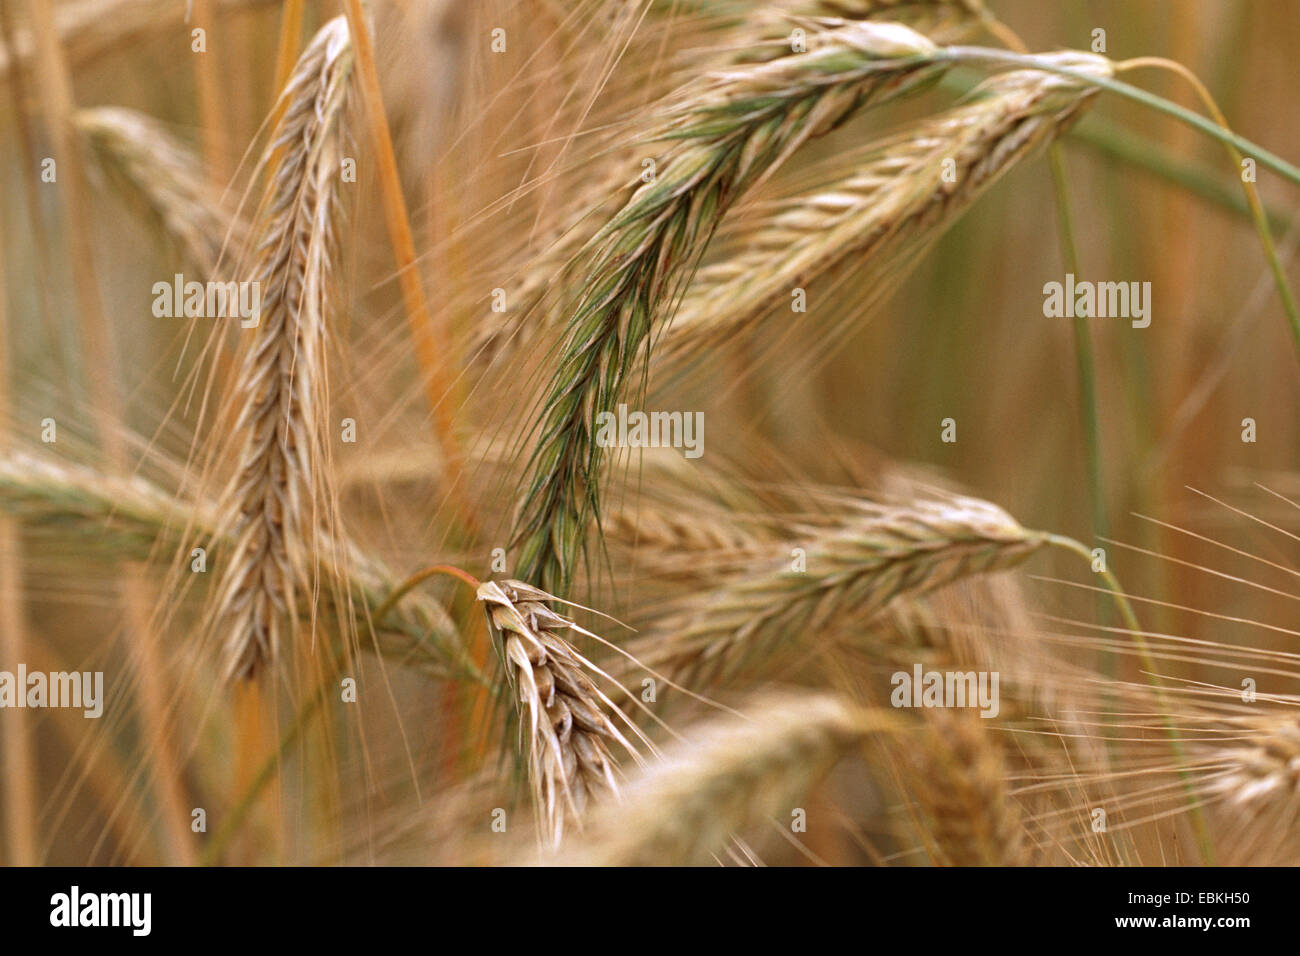 cultivated rye (Secale cereale 'Afghanicum', Secale cereale Afghanicum), cultivar Afghanicum Stock Photo